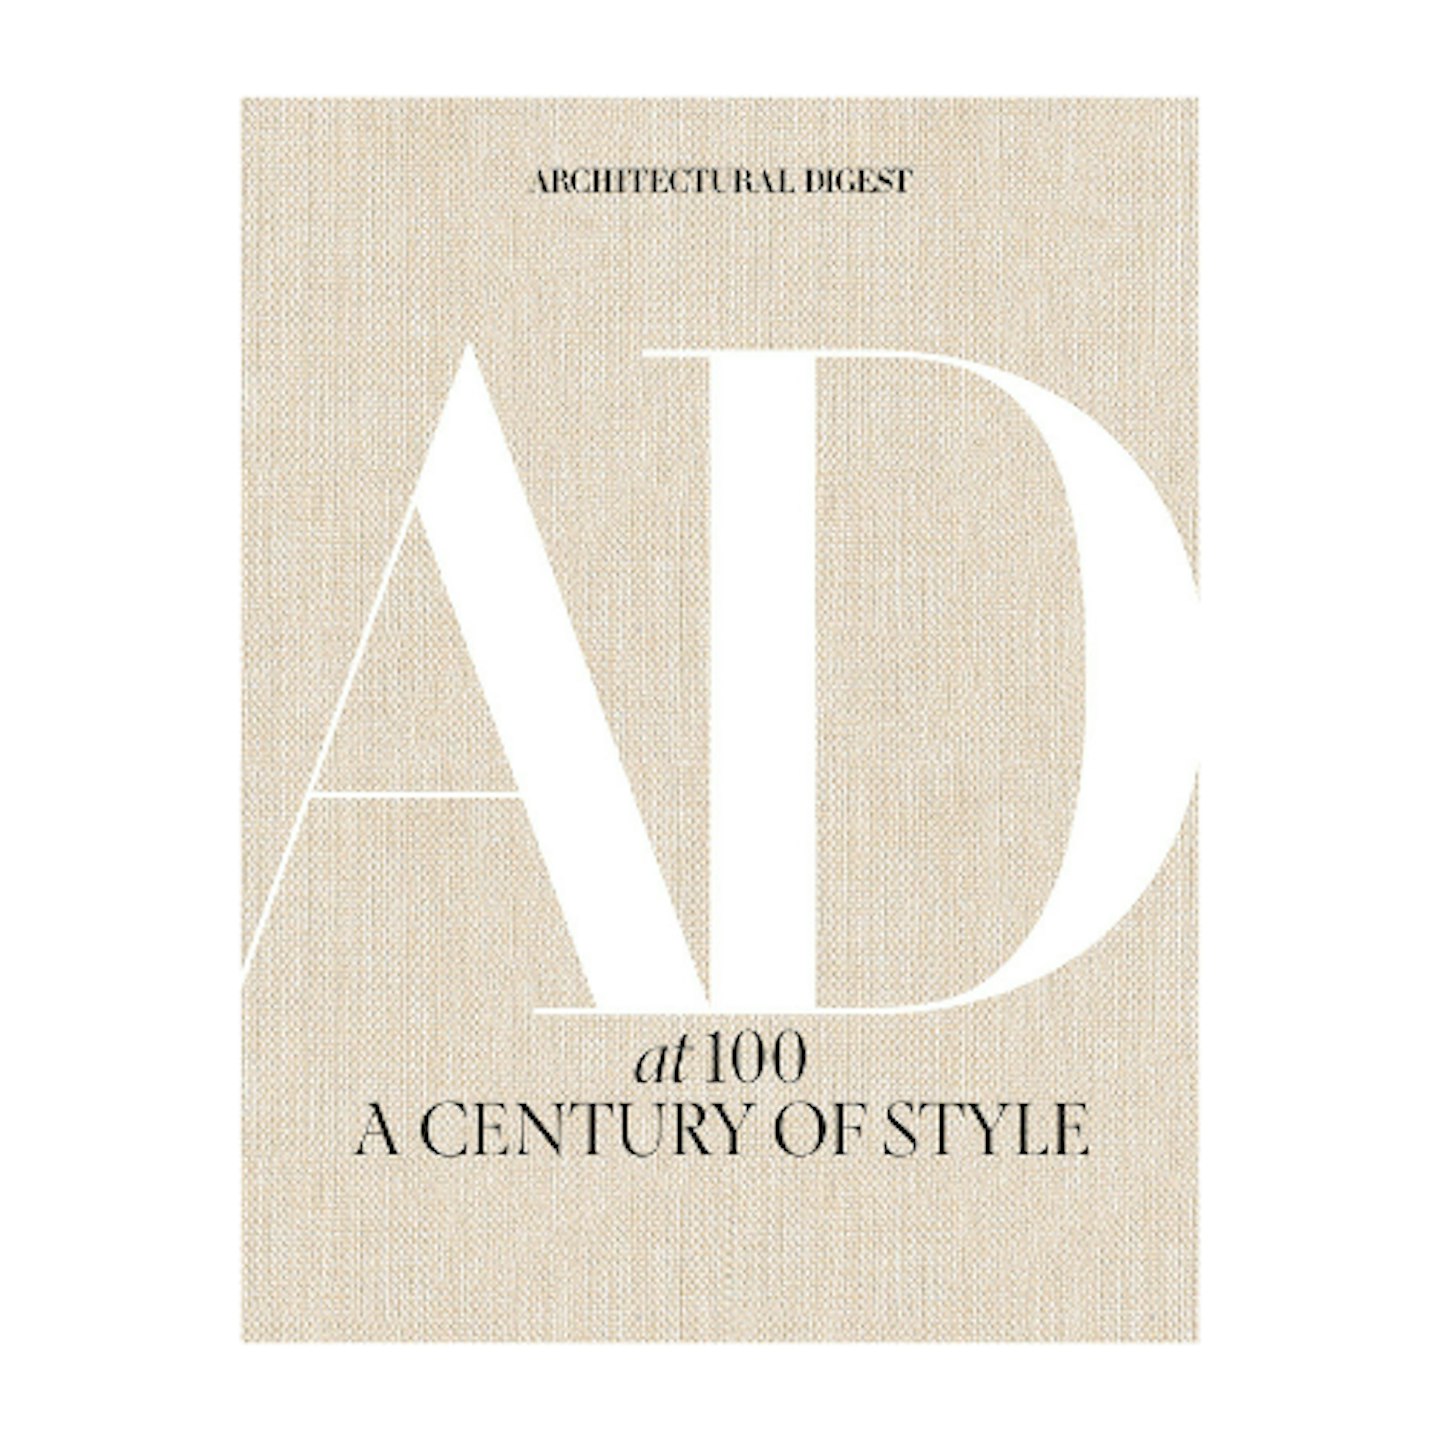 Architectural Digest at 100: A Century of Style on white background